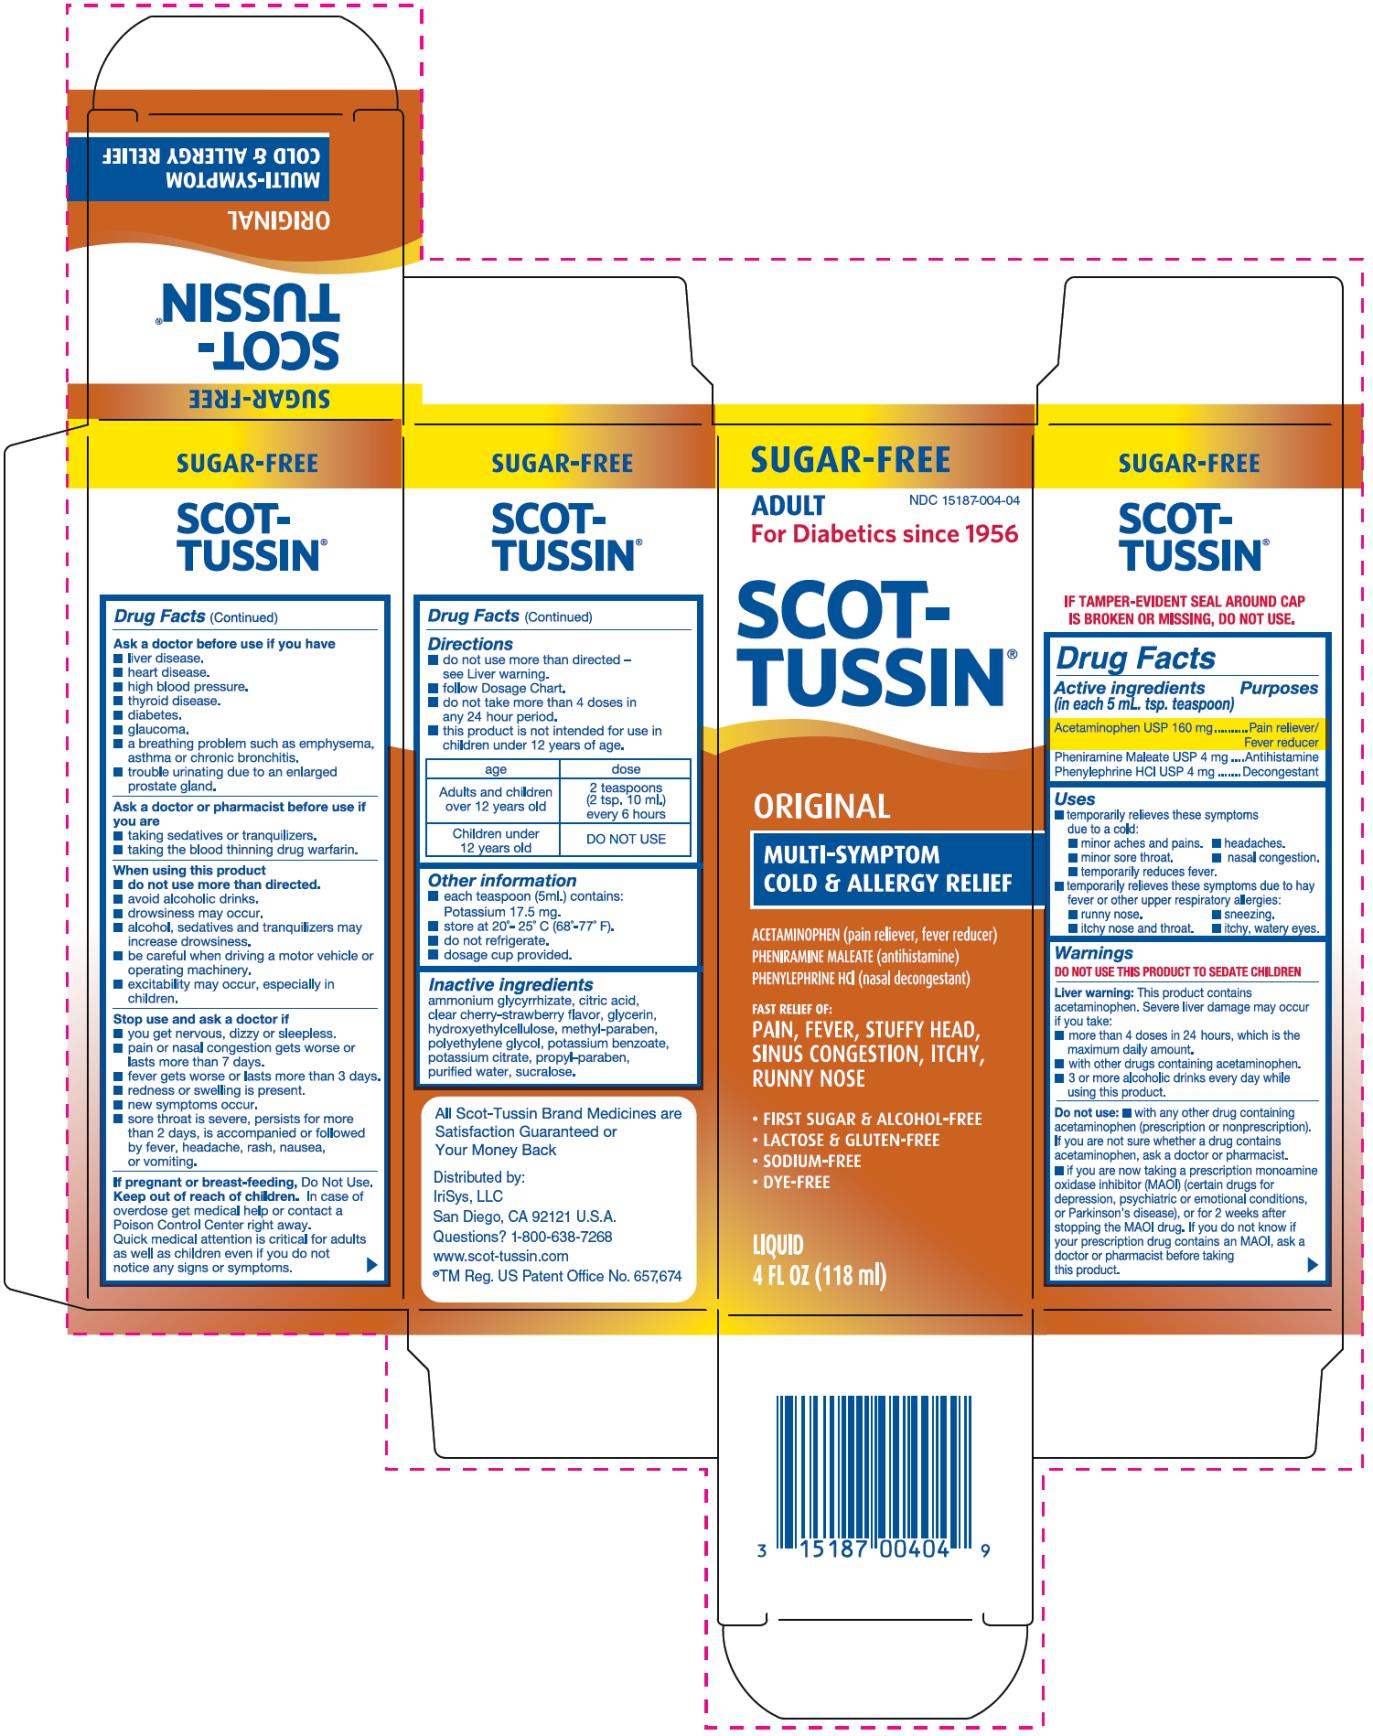 PRINCIPAL DISPLAY PANEL 
SUGAR-FREE
ADULT
NDC: <a href=/NDC/15187-004-04>15187-004-04</a>
For Diabetics since 1956
SCOT-TUSSIN®
ORIGINAL
MULTI-SYMPTOM
COLD & ALLERGY RELIEF
ACETAMINOPHEN (pain reliever, fever reducer)
PHENIRAMINE MALEATE (antihistamine)
PHENYLEPHRINE HCI (nasal decongestant)
FAST RELIEF OF:
PAIN, FEVER, STUFFY HEAD,
SINUS CONGESTION, ITCHY,
RUNNY NOSE
	FIRST SUGAR & ALCOHOL-FREE
	LACTOSE & GLUTEN-FREE
	SODIUM-FREE
	DYE-FREE
LIQUID
4 FL OZ (118 ml)
